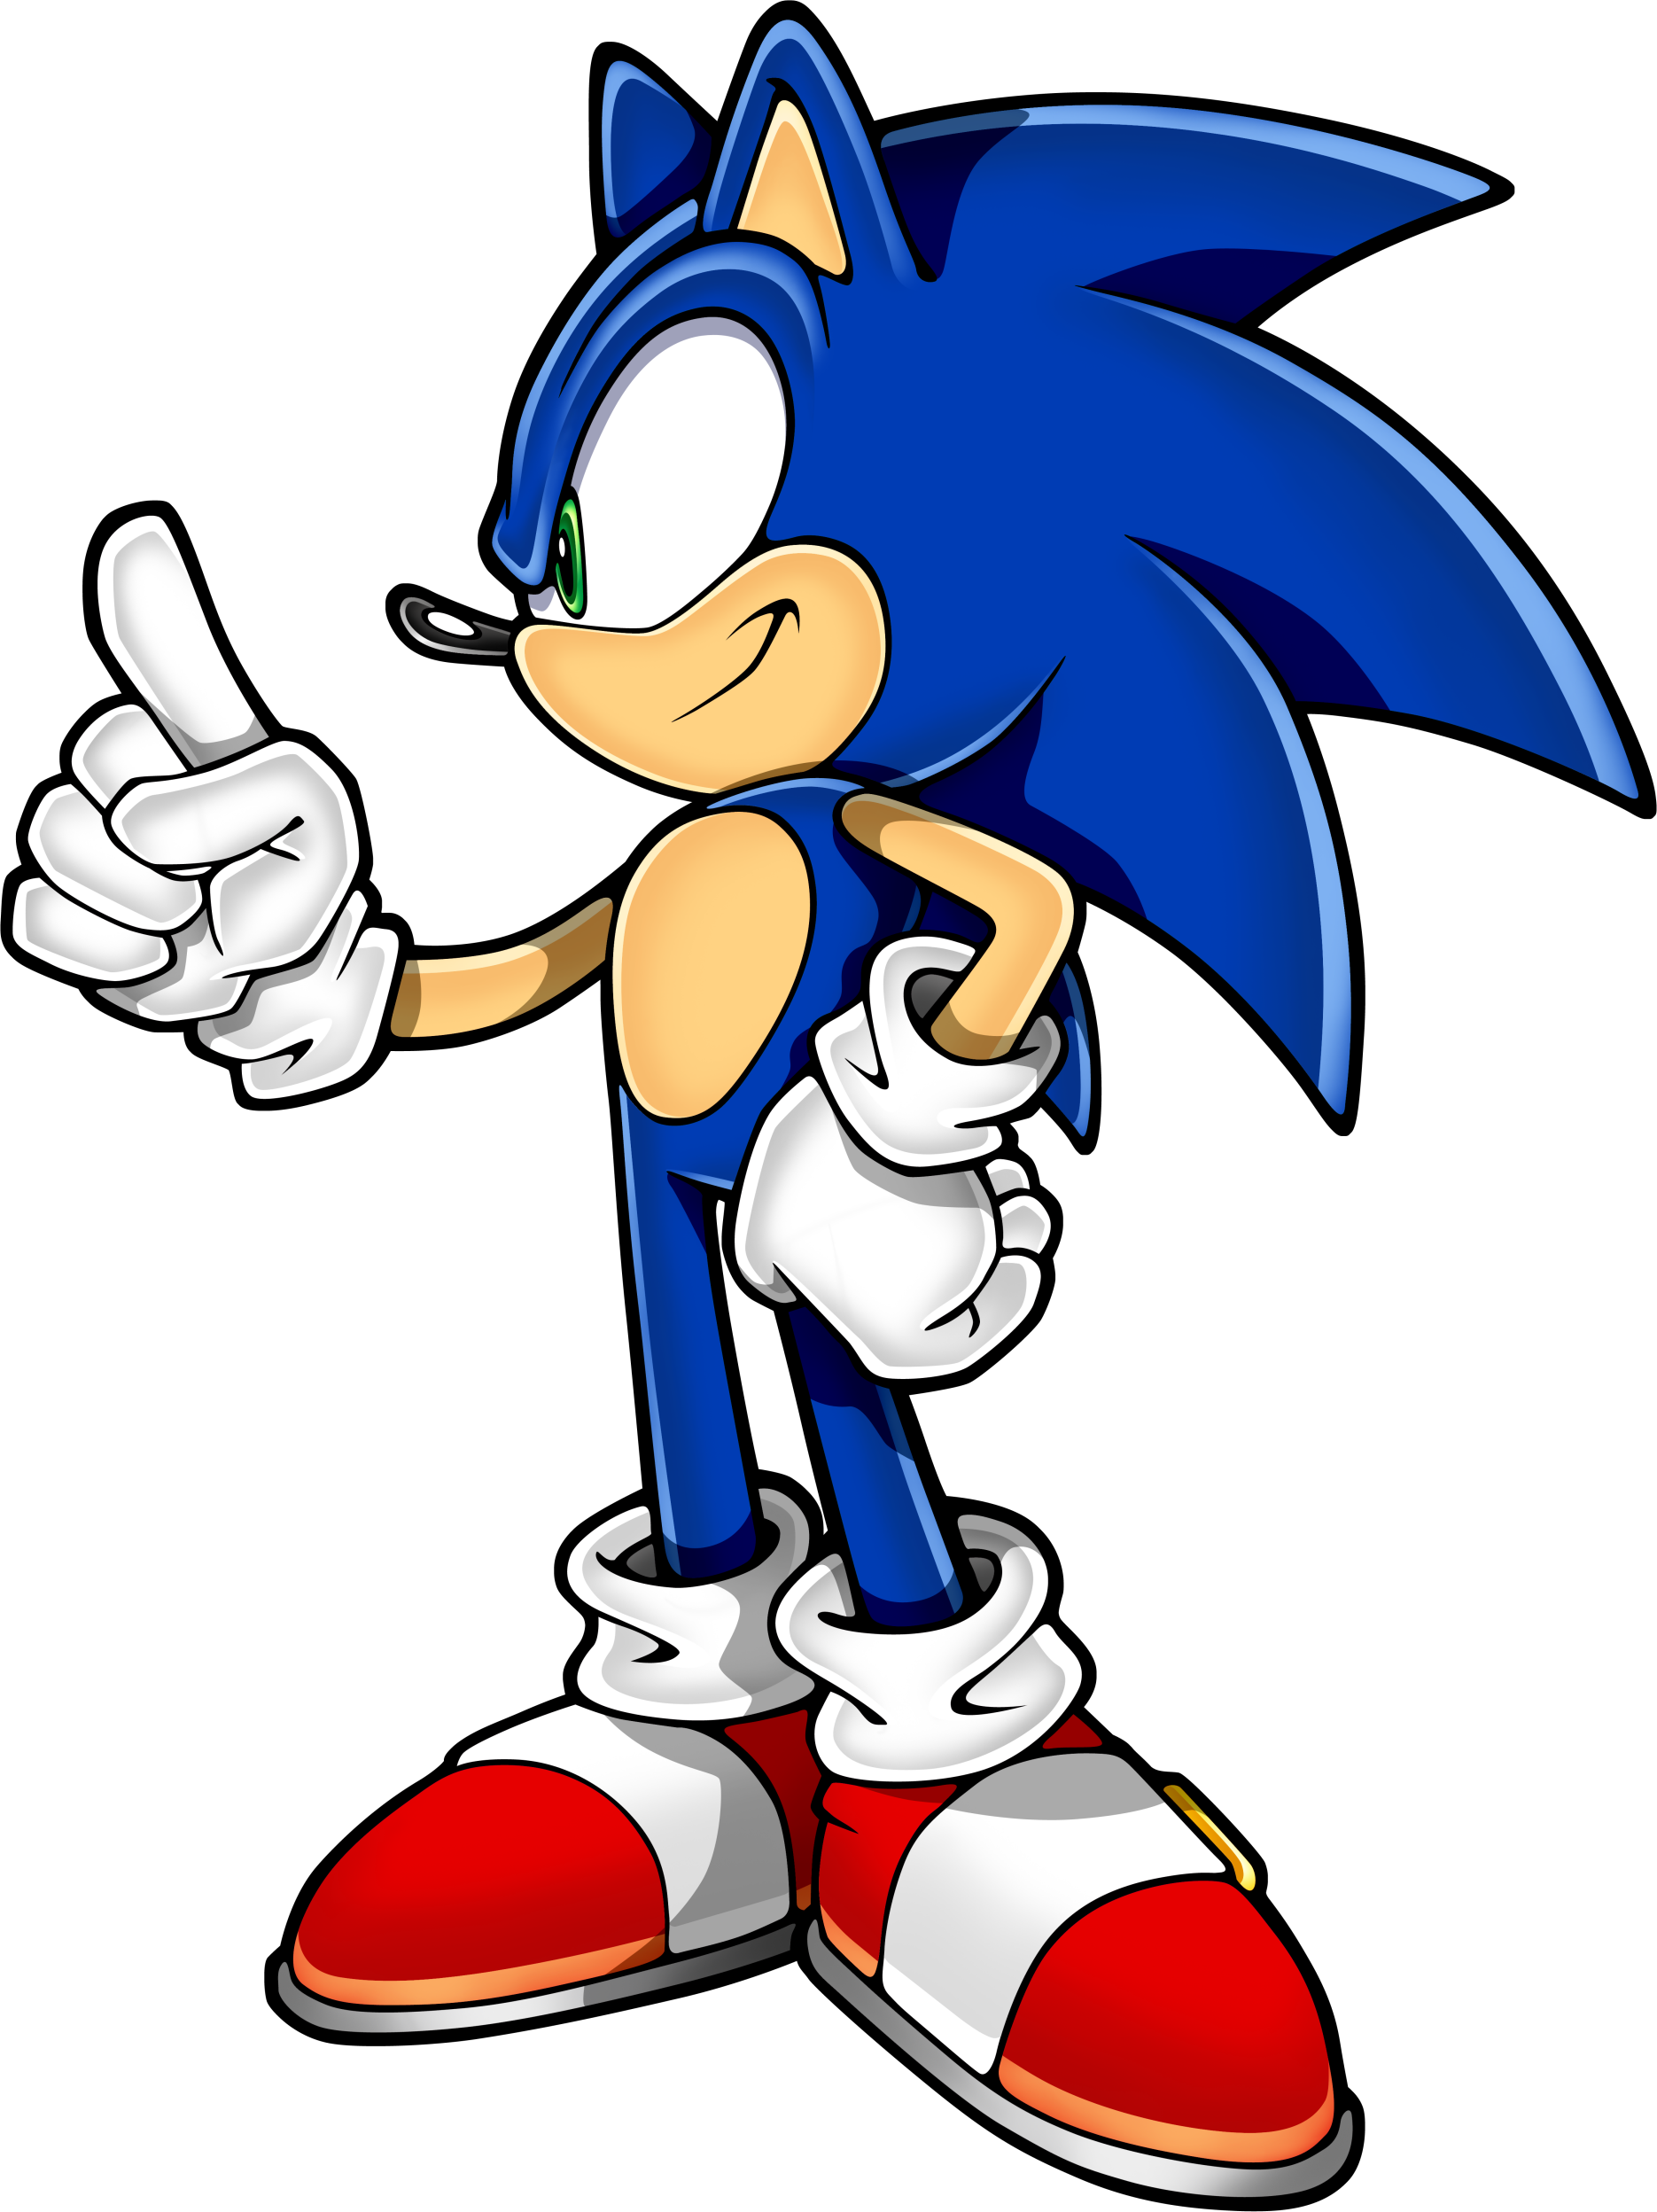 http://images4.wikia.nocookie.net/__cb20121228174324/thefakegees/images/7/71/Sonic-art-assets-dvd-2.png